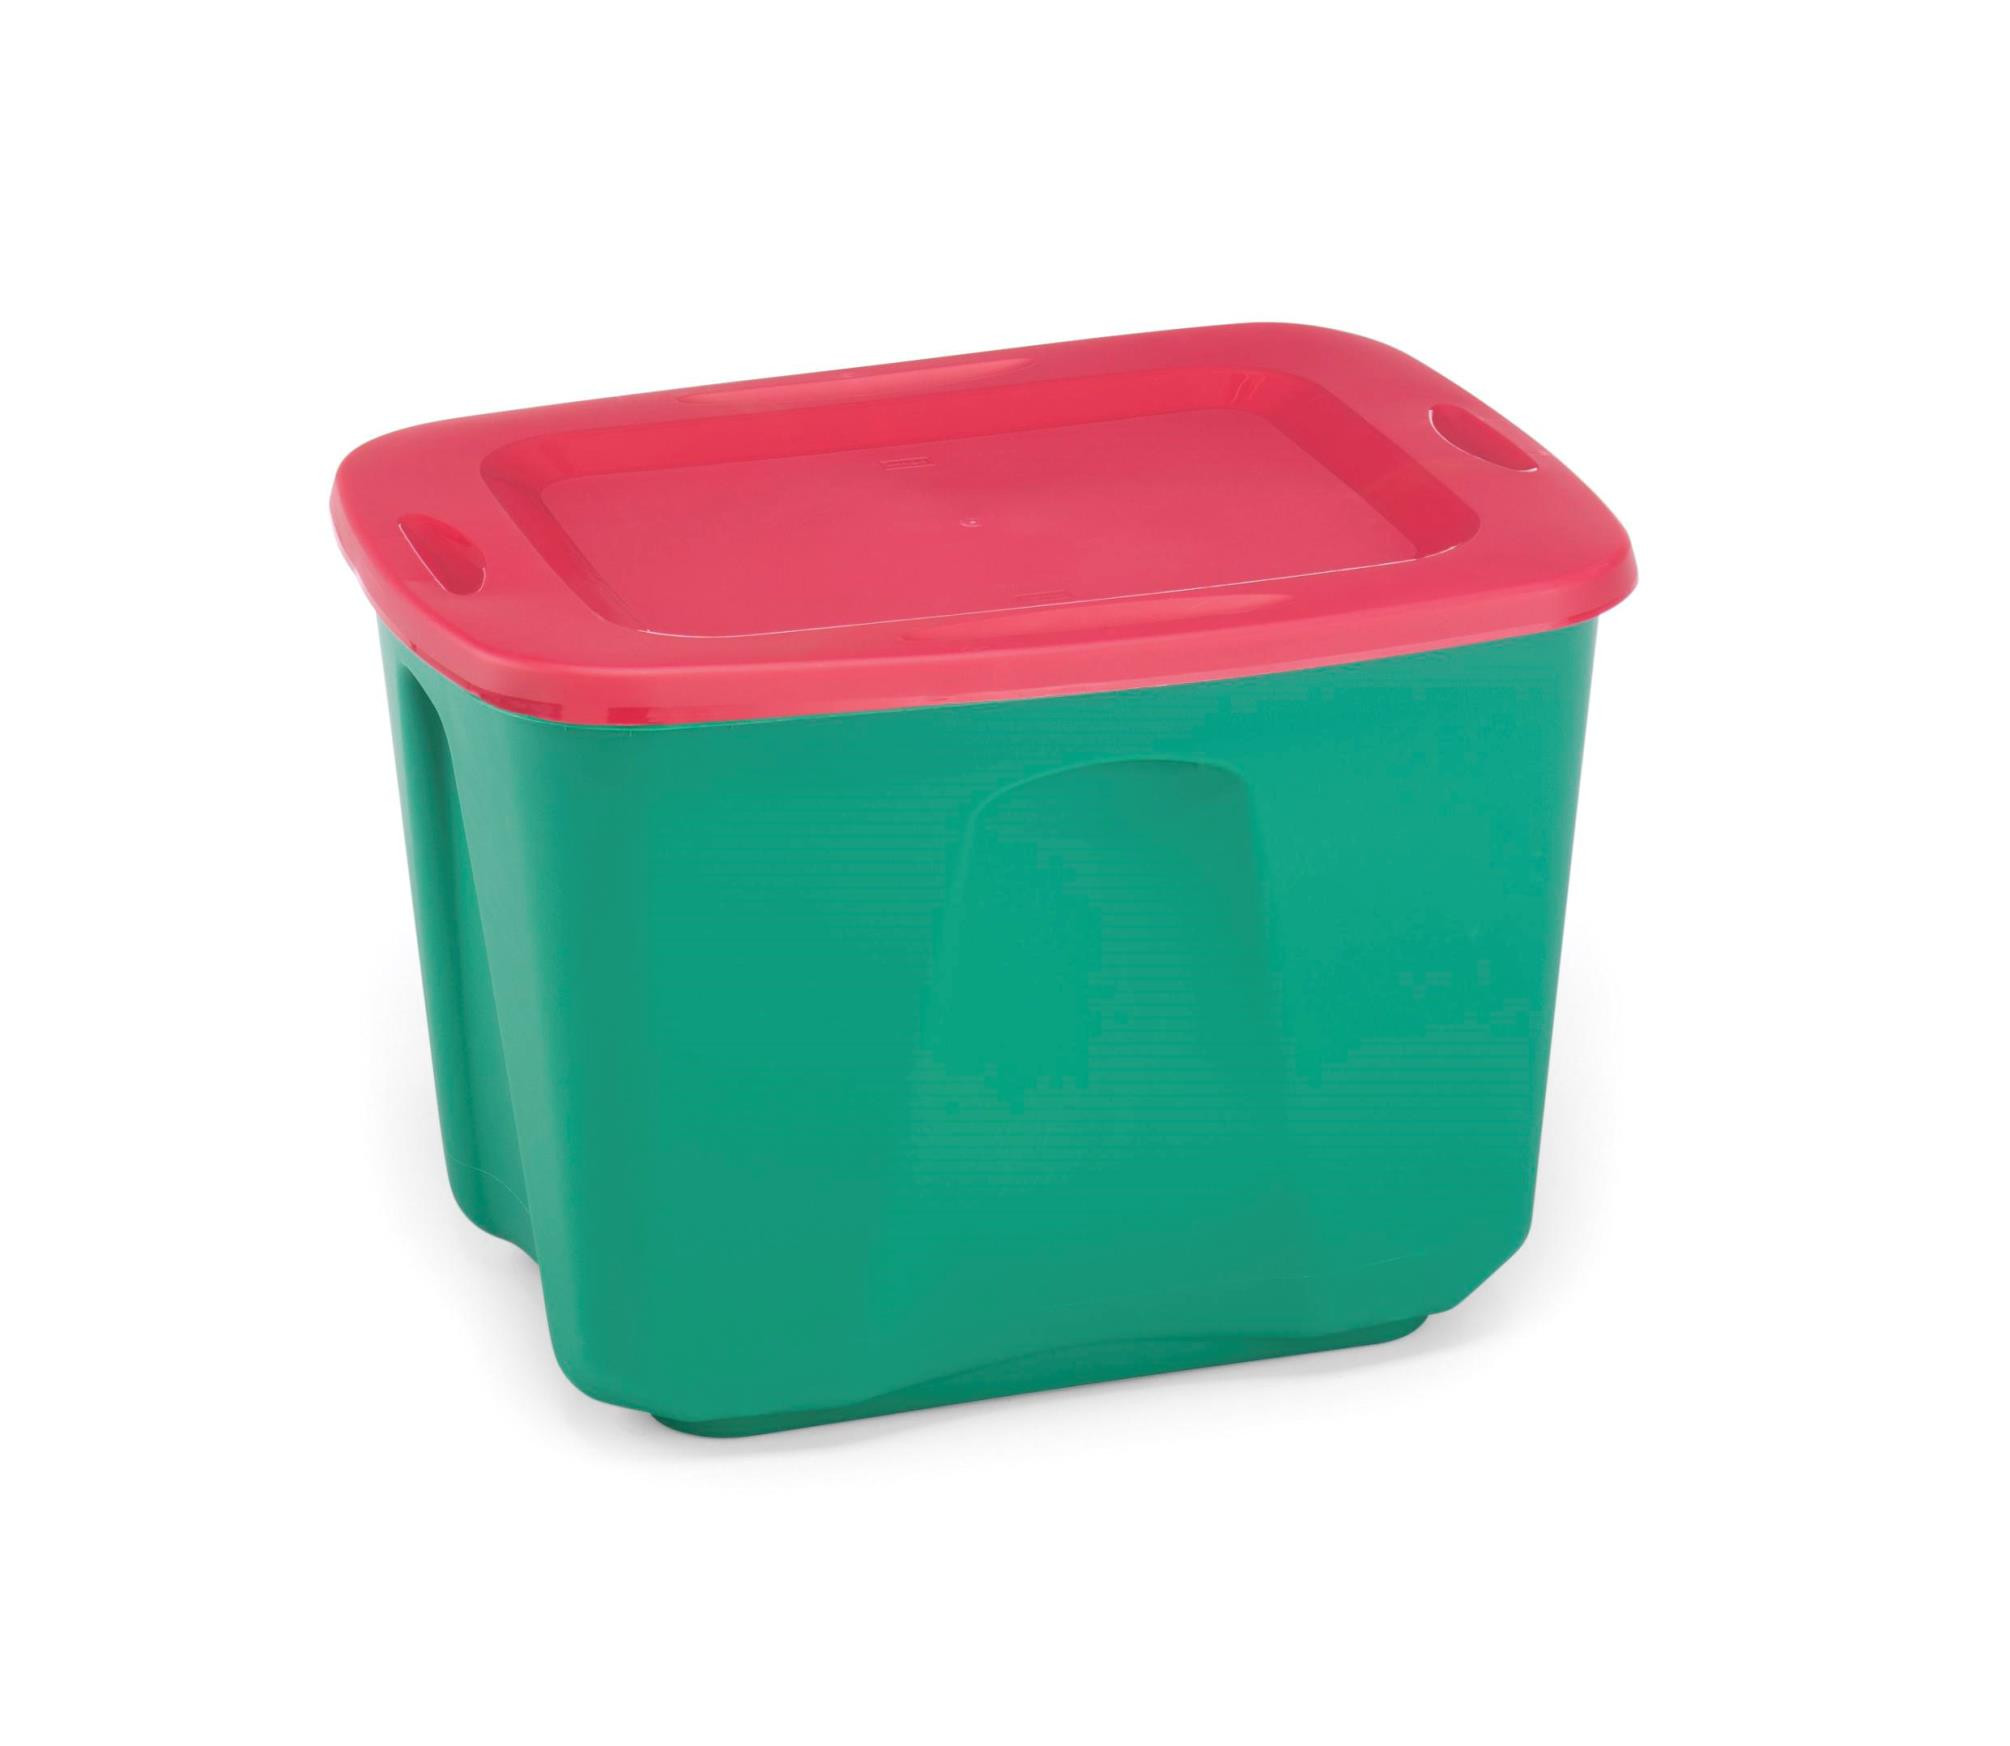 Christmas Storage Totes
 Homz 18 Gallon Holiday Storage Tote Red Green Home